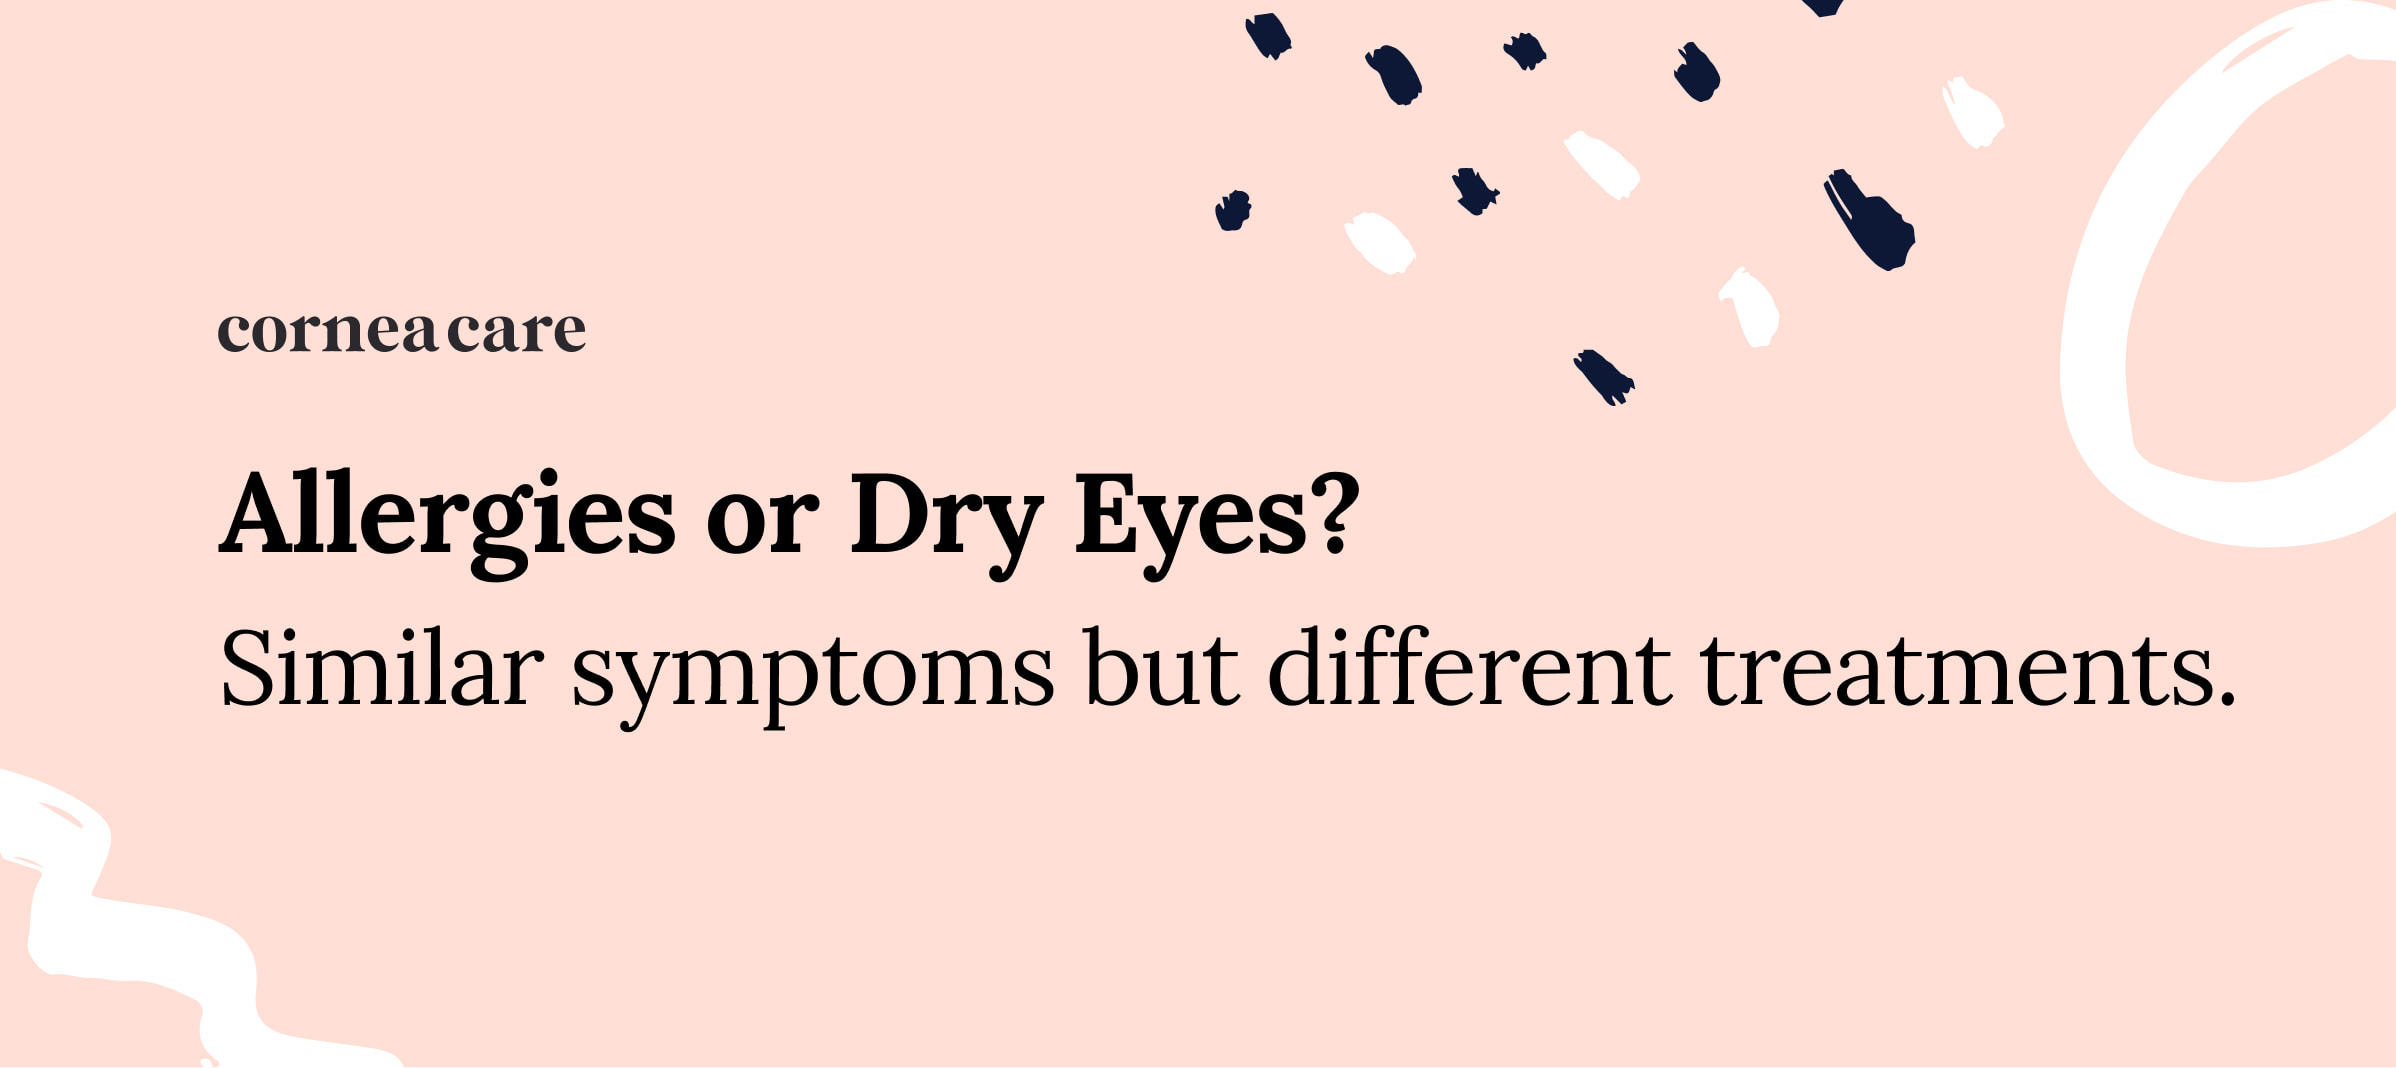 Allergies and Dry Eyes: Are They Related?